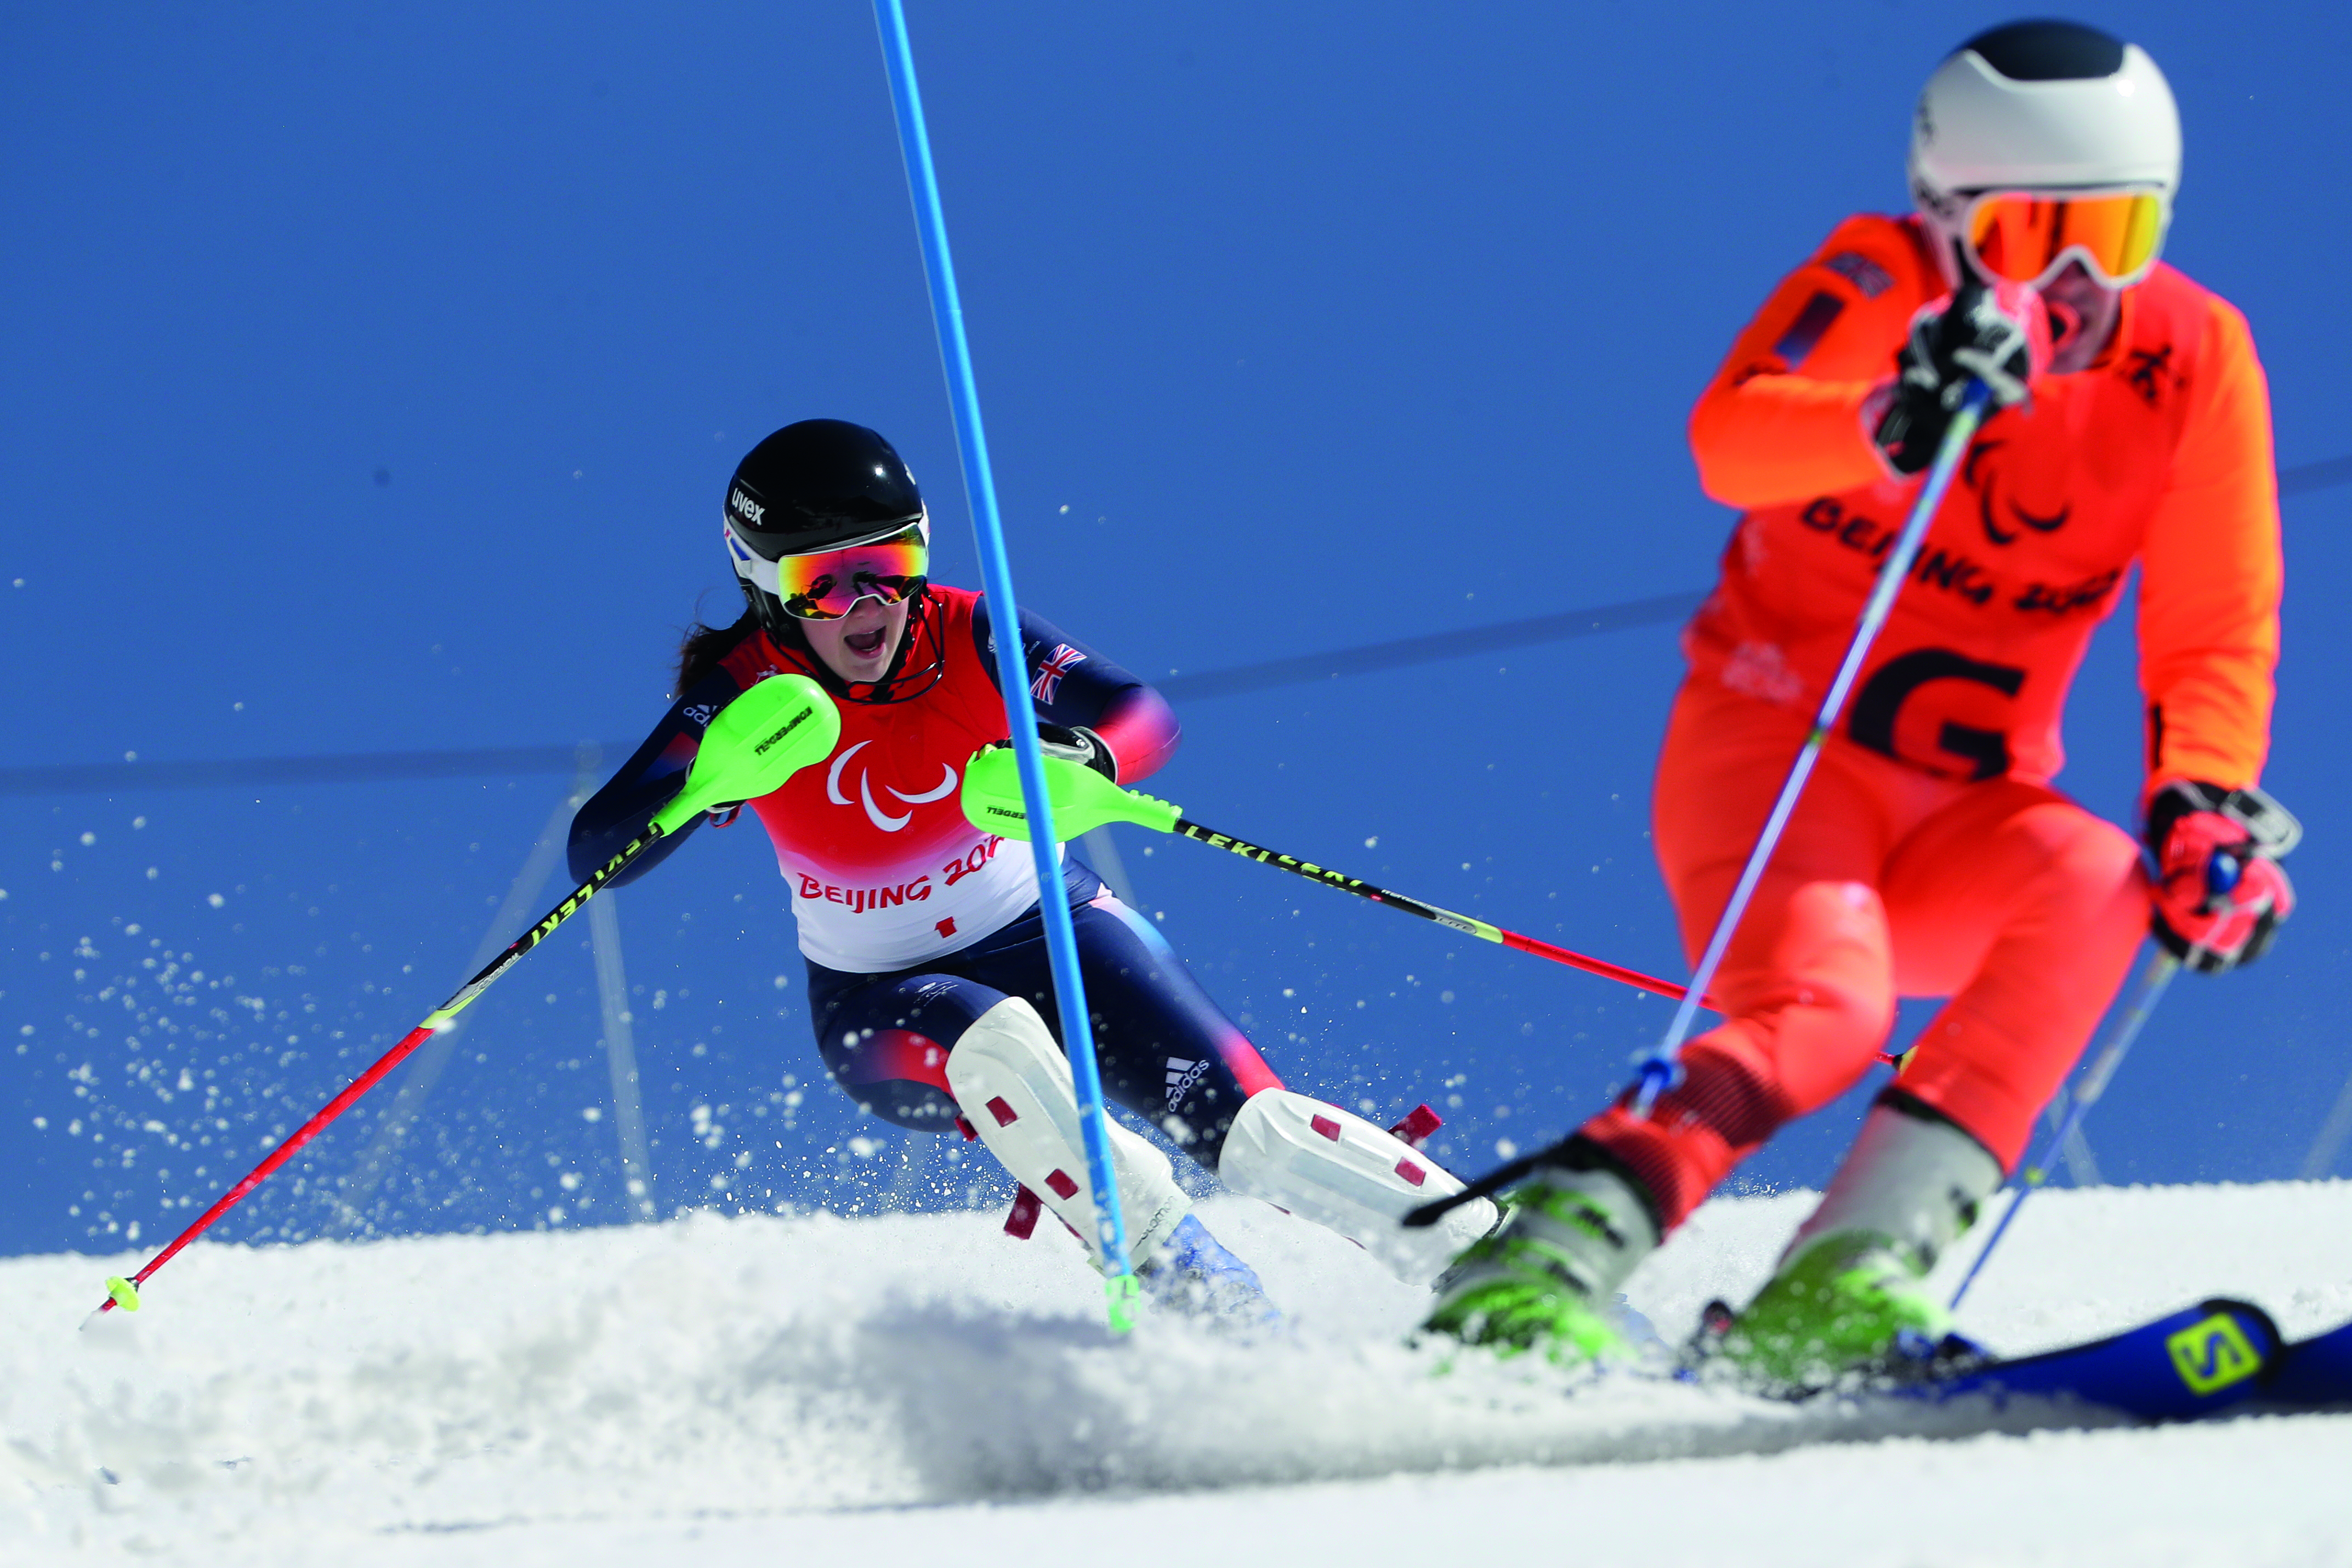 Skier and guide on the ski course.